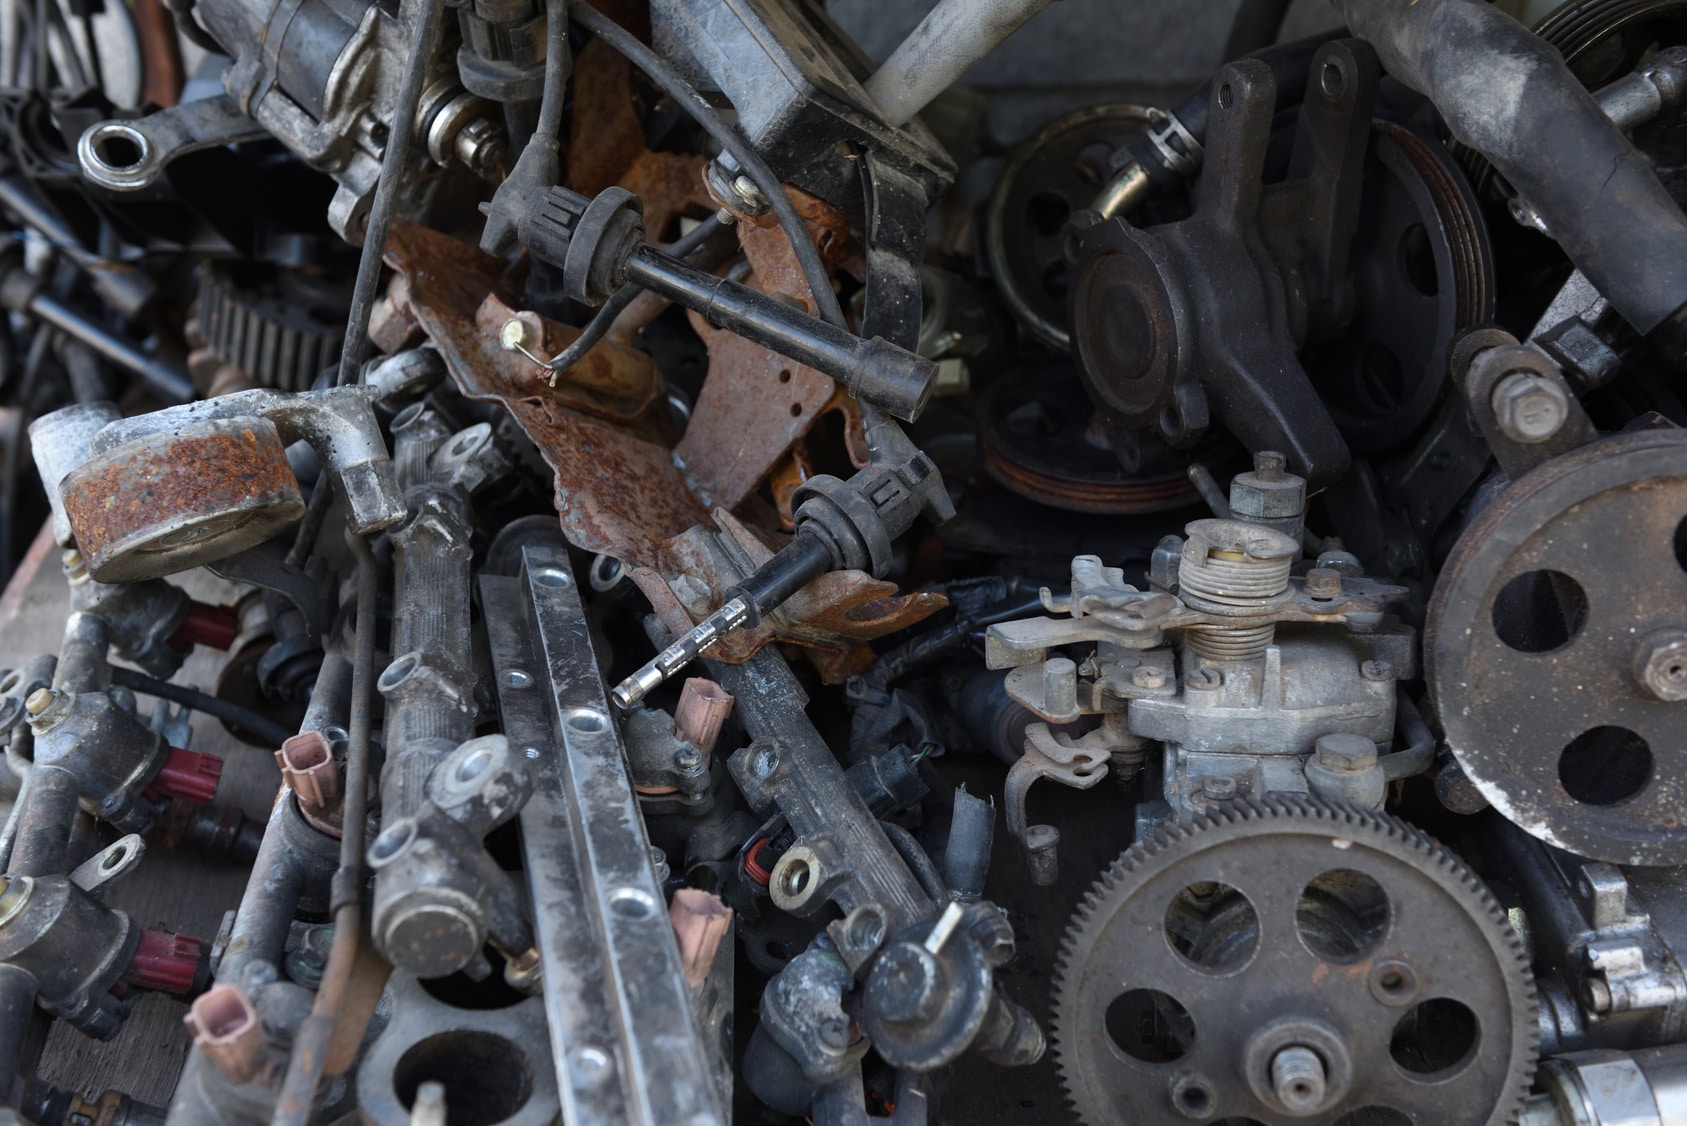 Scrap metal car parts on the floor and if you need to rid your company's scrap metal find a great company in Burnham who can take it.